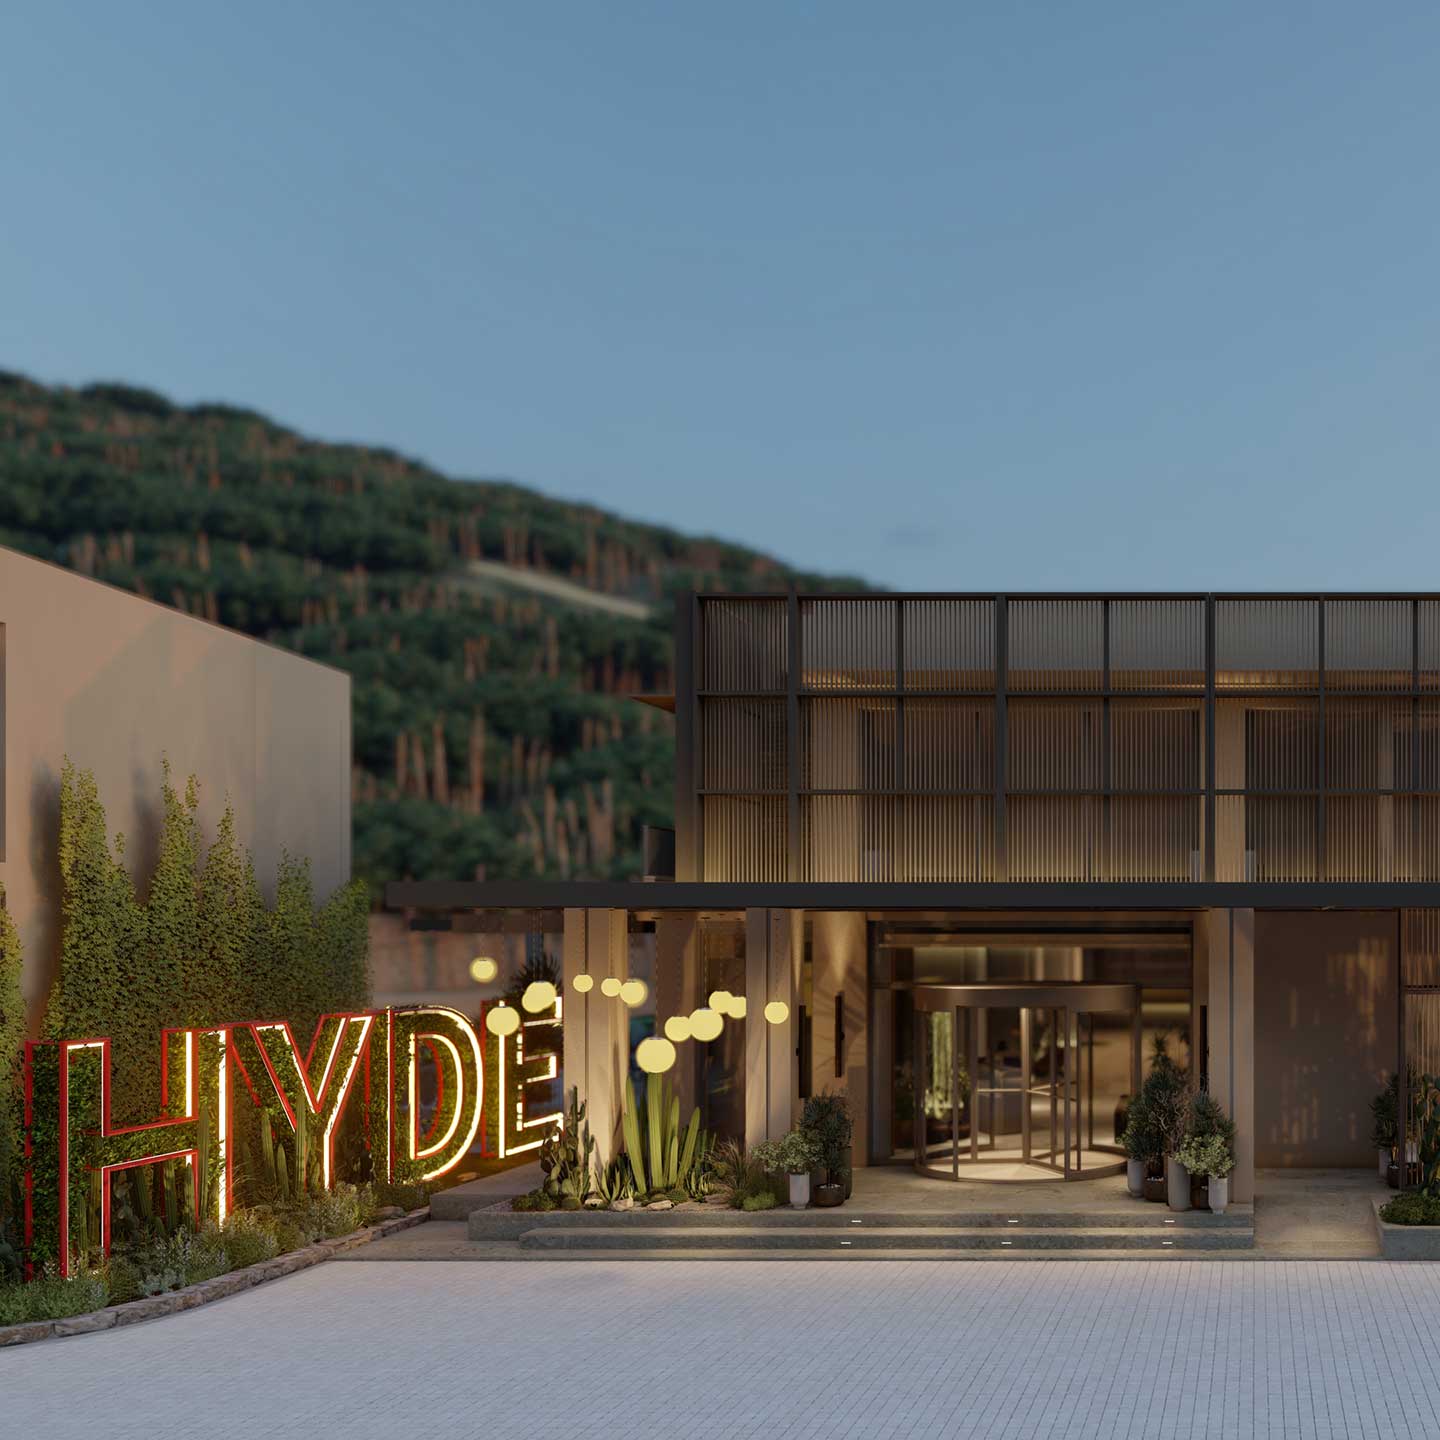 Entrance to the hotel at dusk, with a large HYDE sign on the left